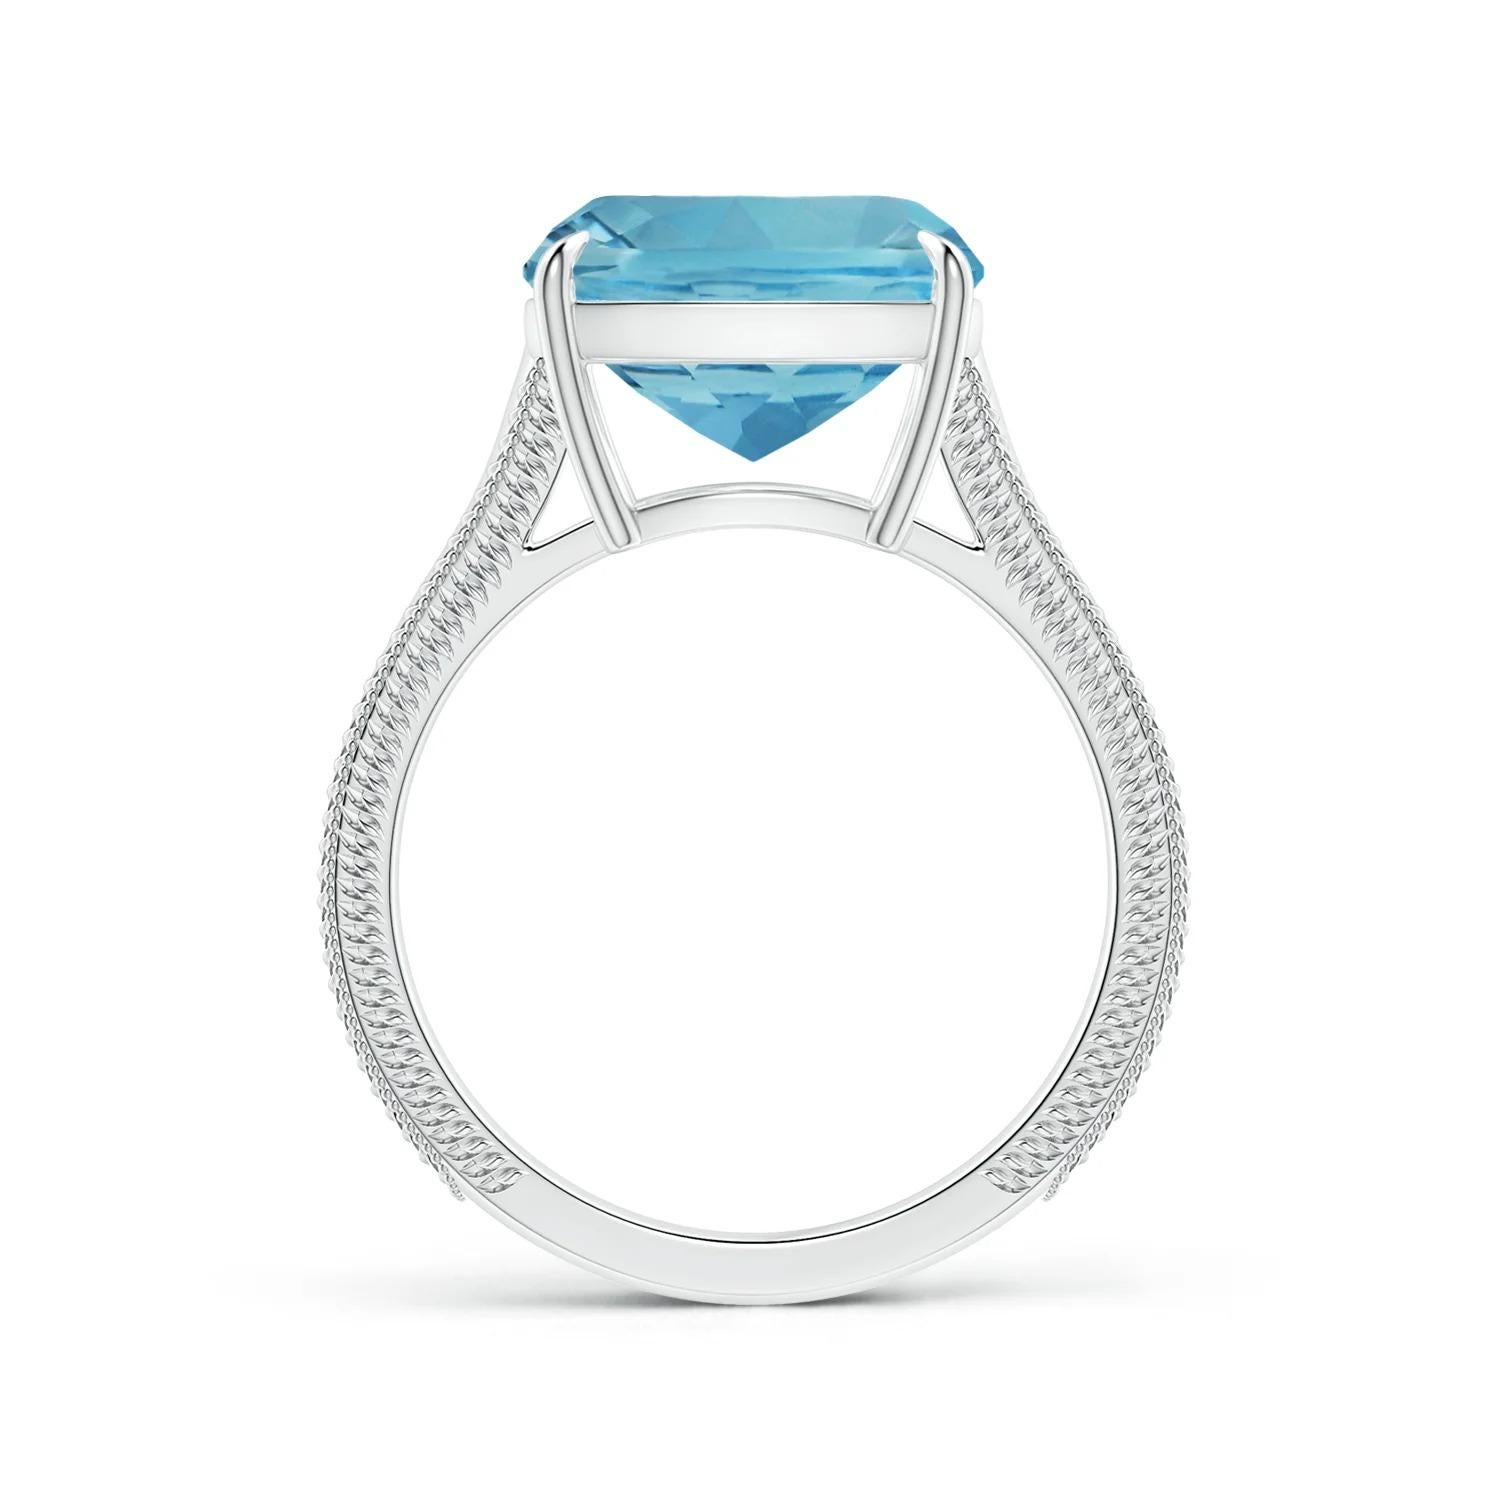 For Sale:  Angara Gia Certified Cushion Aquamarine Solitaire Ring in White Gold 2